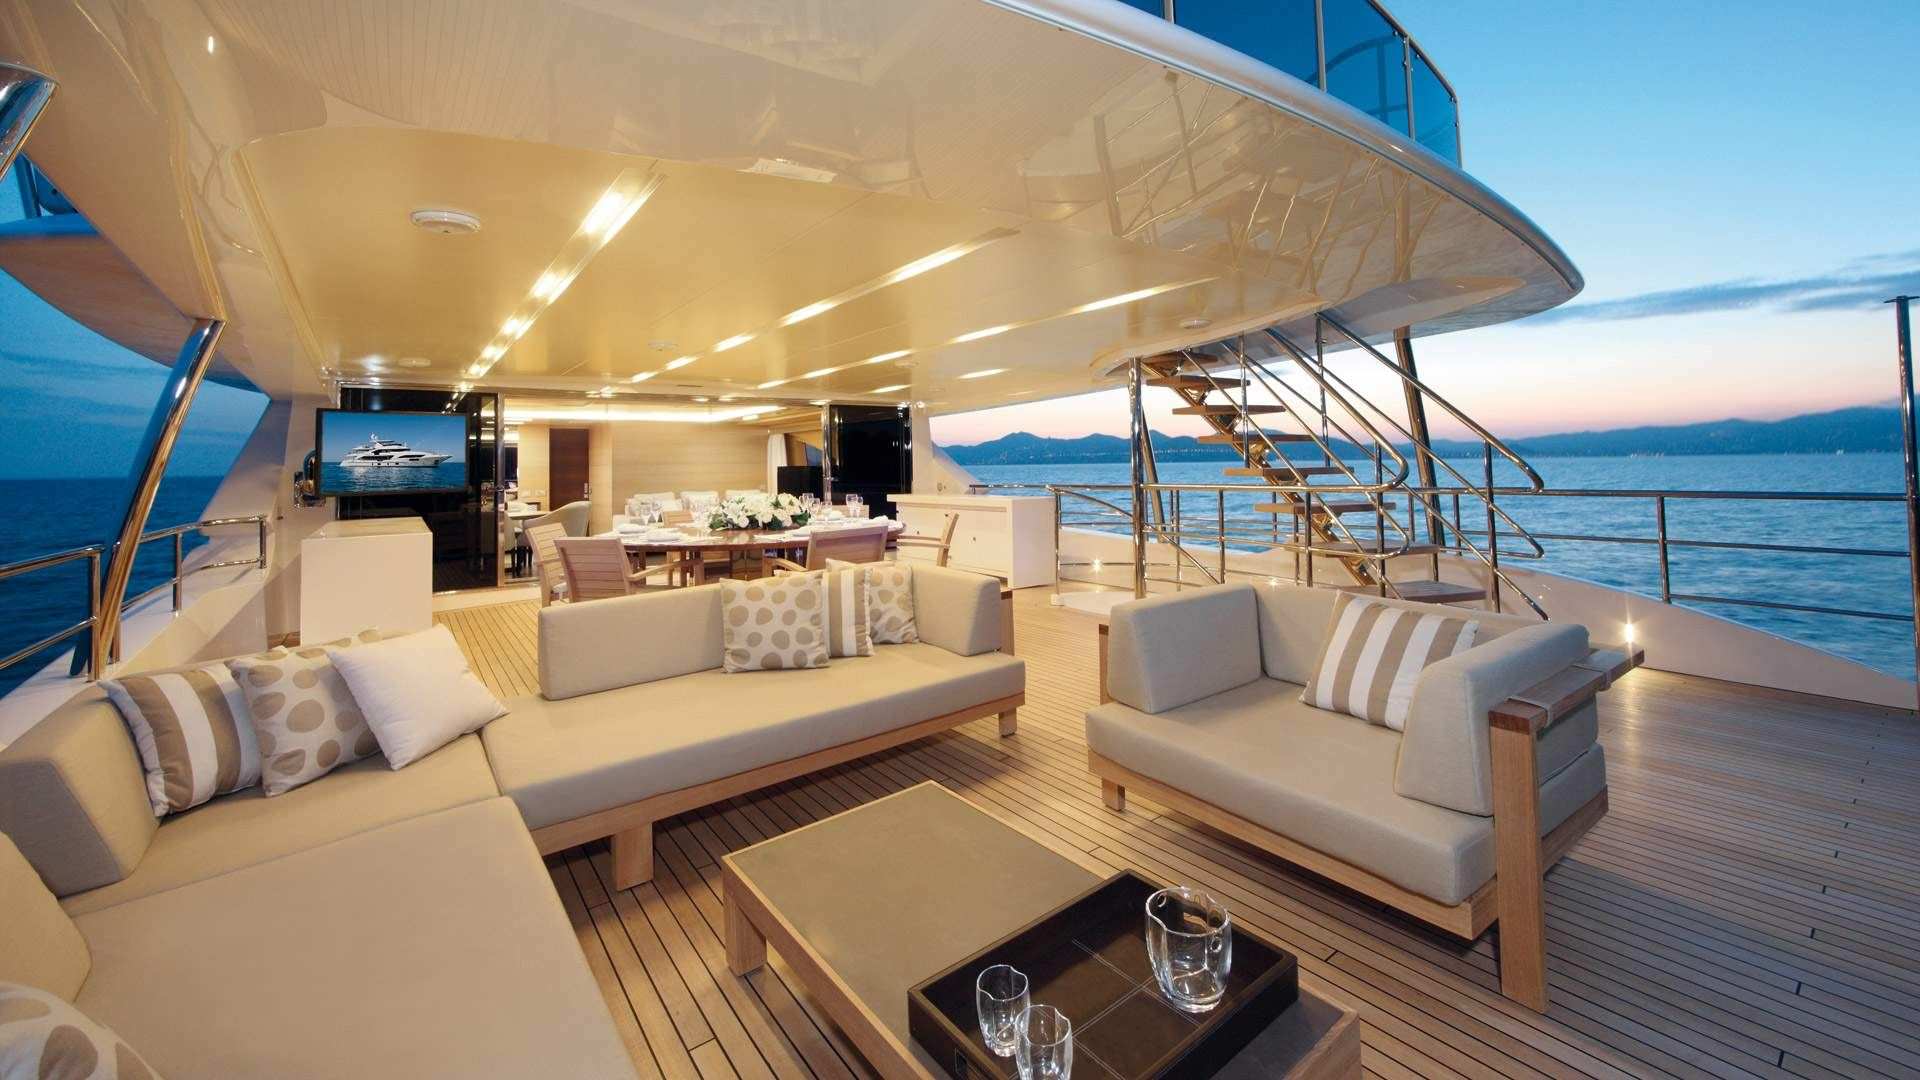 IoT Mobile App for Smart Buildings and Yachts Management